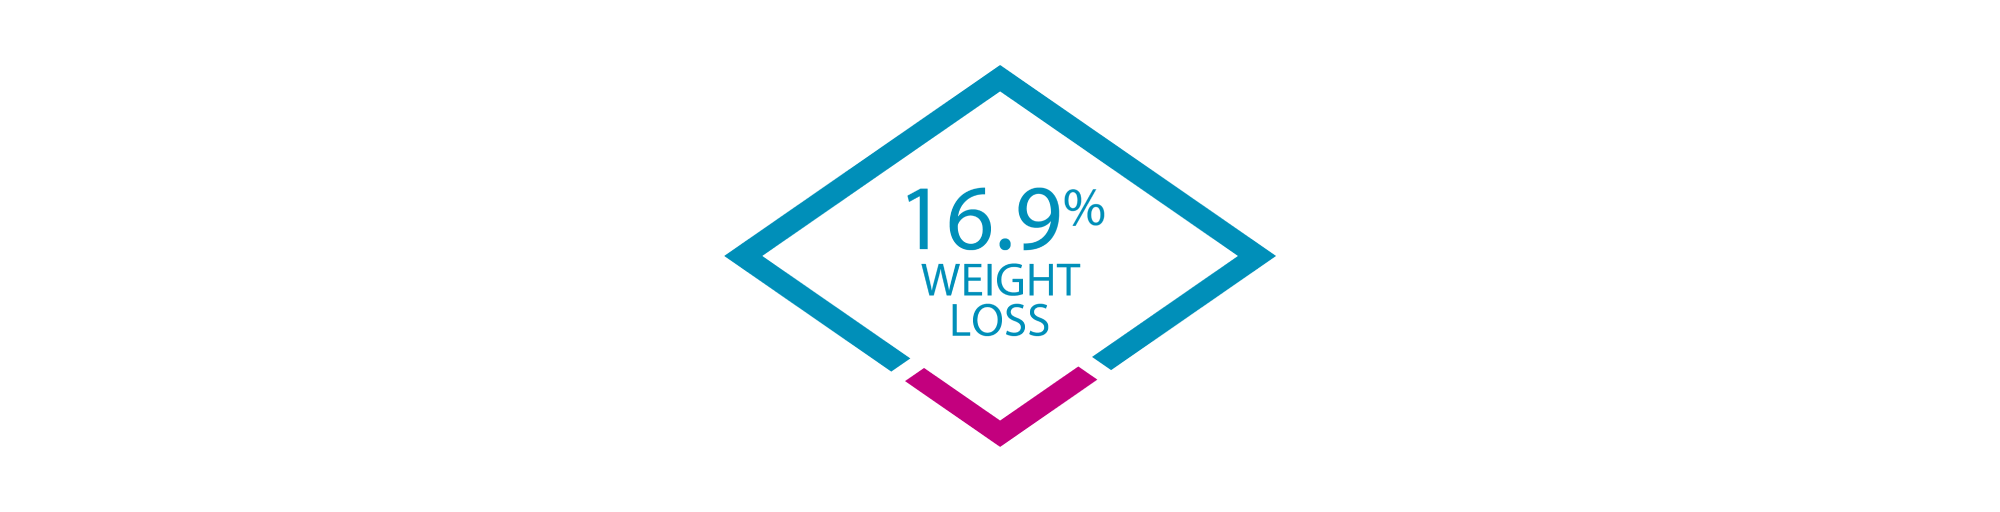 16.9% mean weight loss